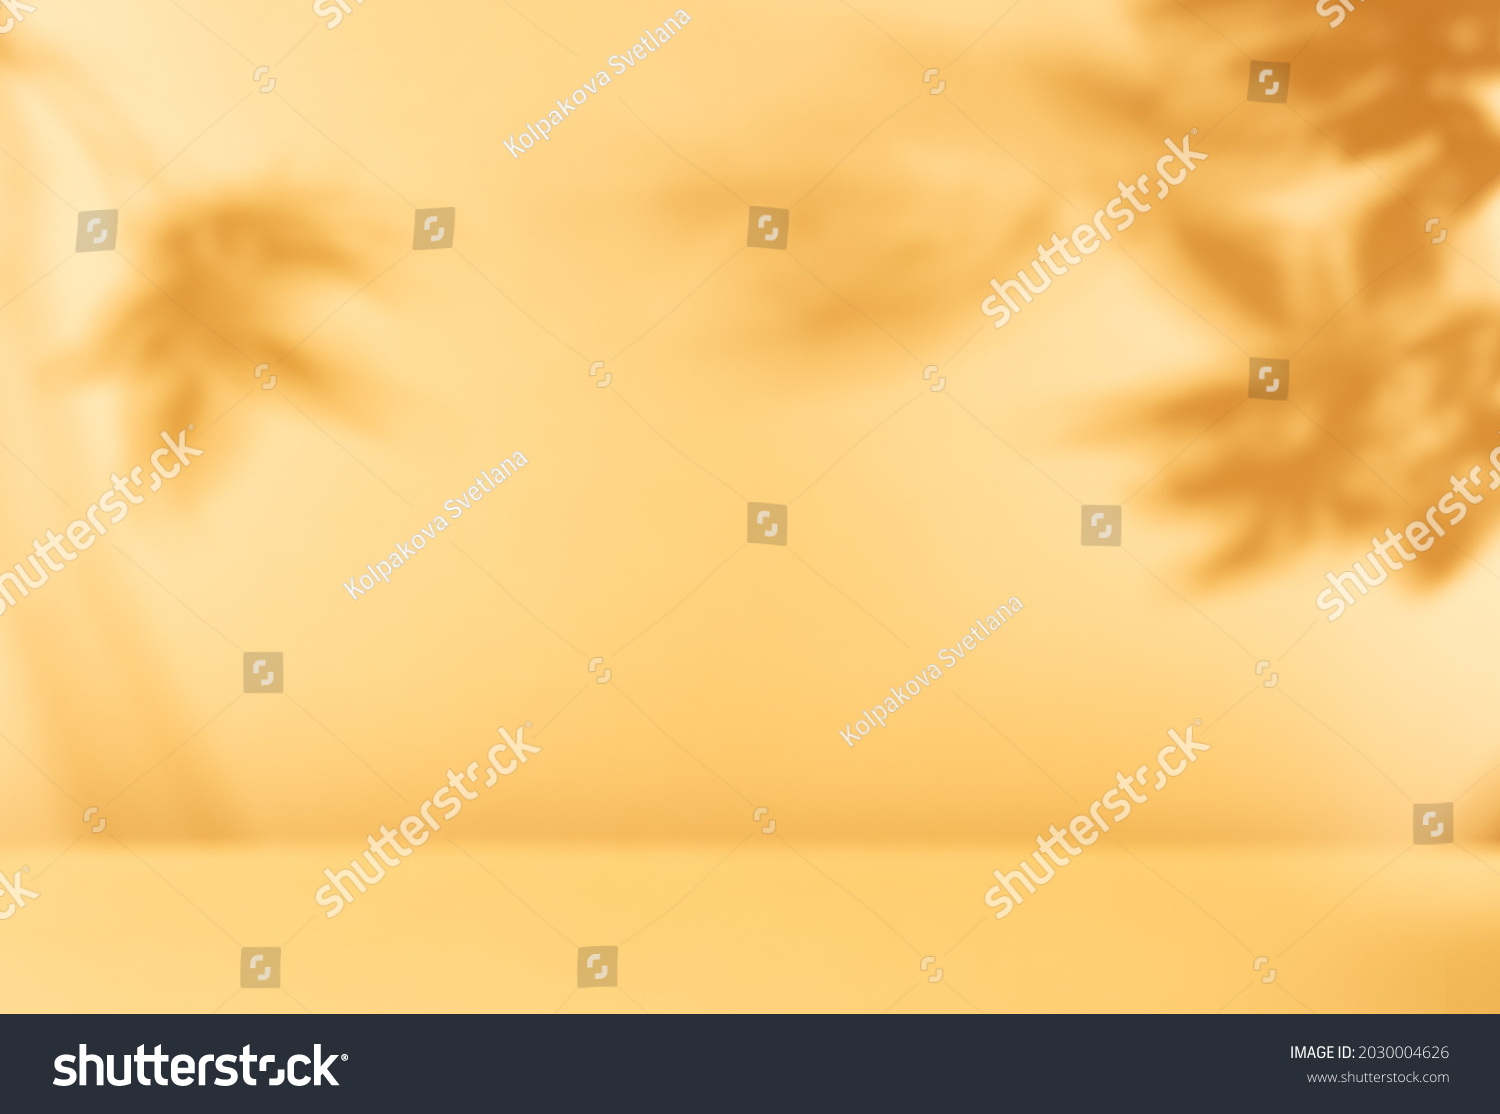 Autumn background with shadow of the maple tree leaves on a wall. Abstract Autumnal scene. #2030004626